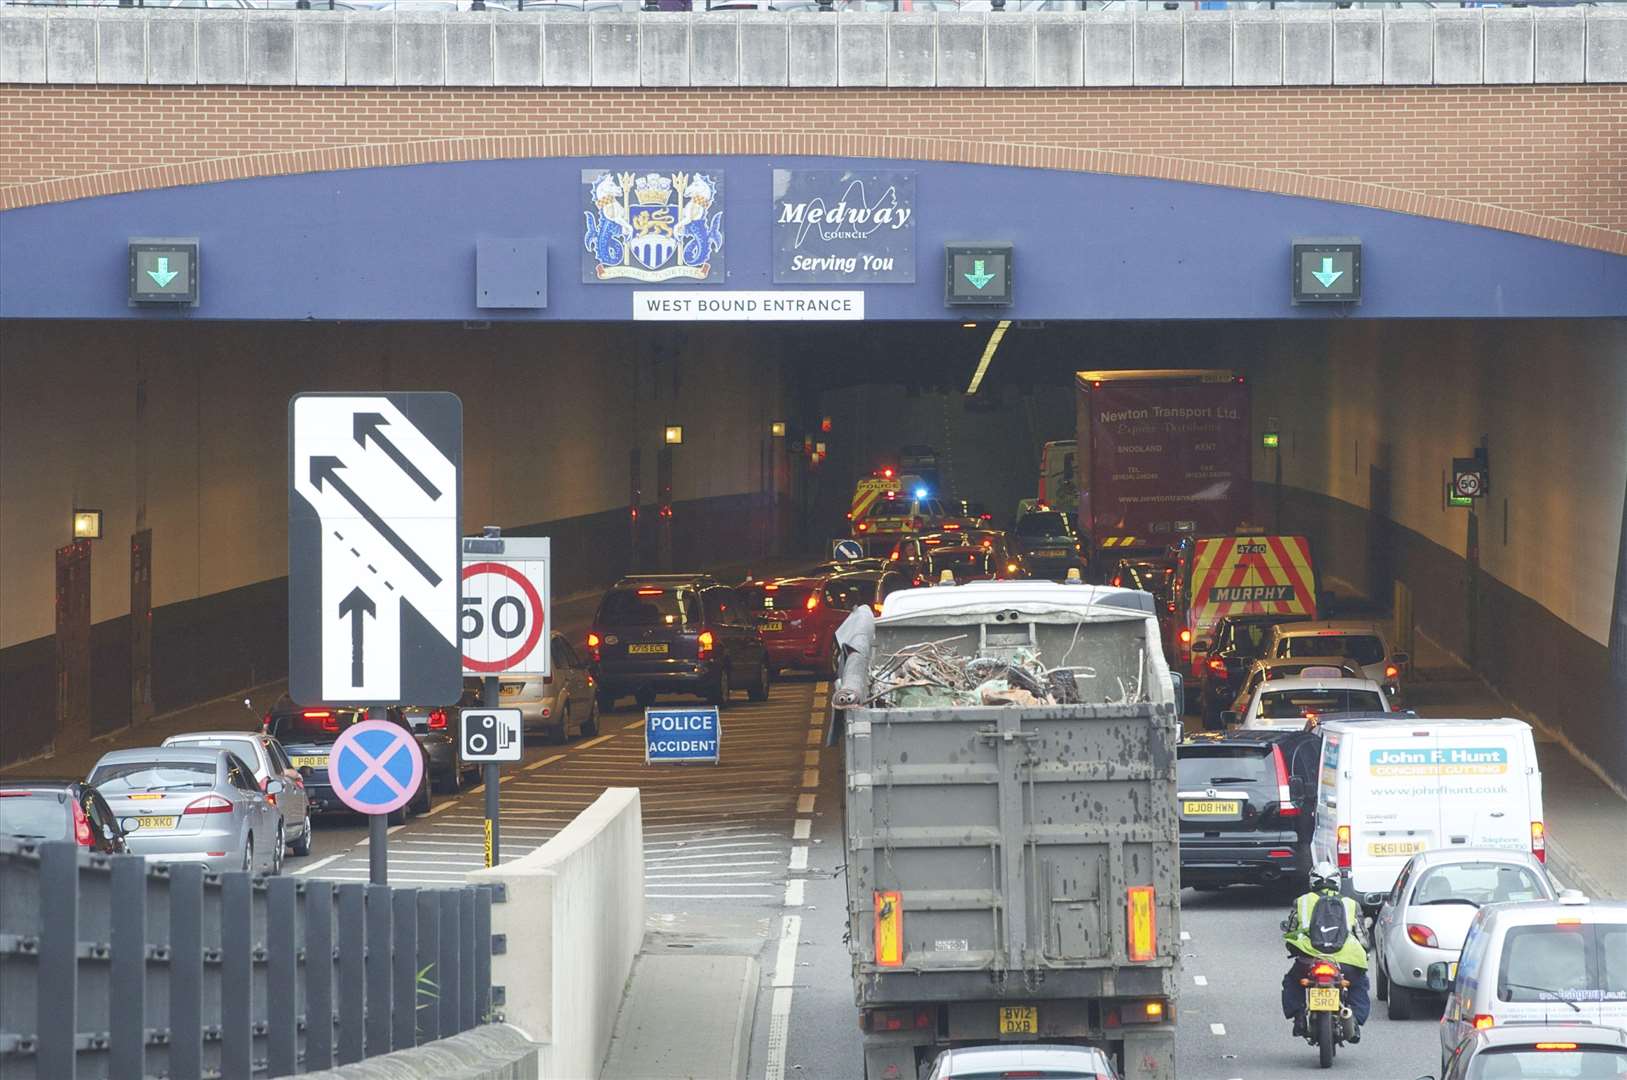 Delays at the Medway Tunnel